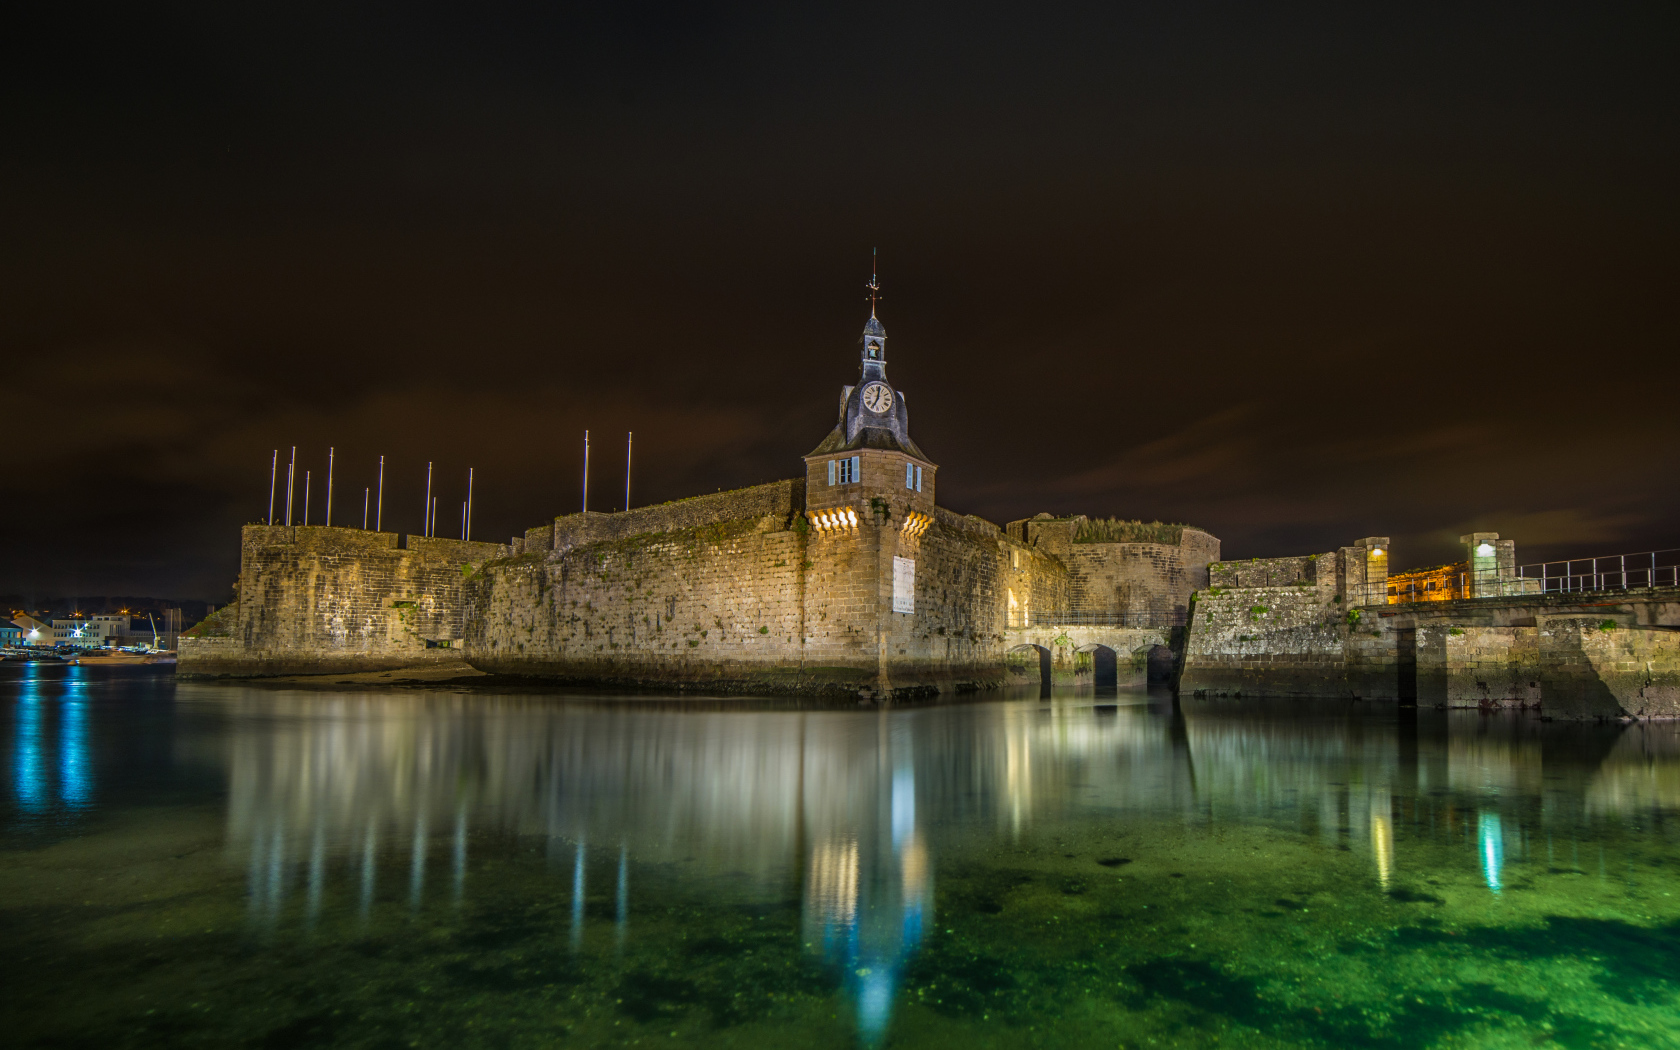 Fortress by the water at night, commune Concarneau. France